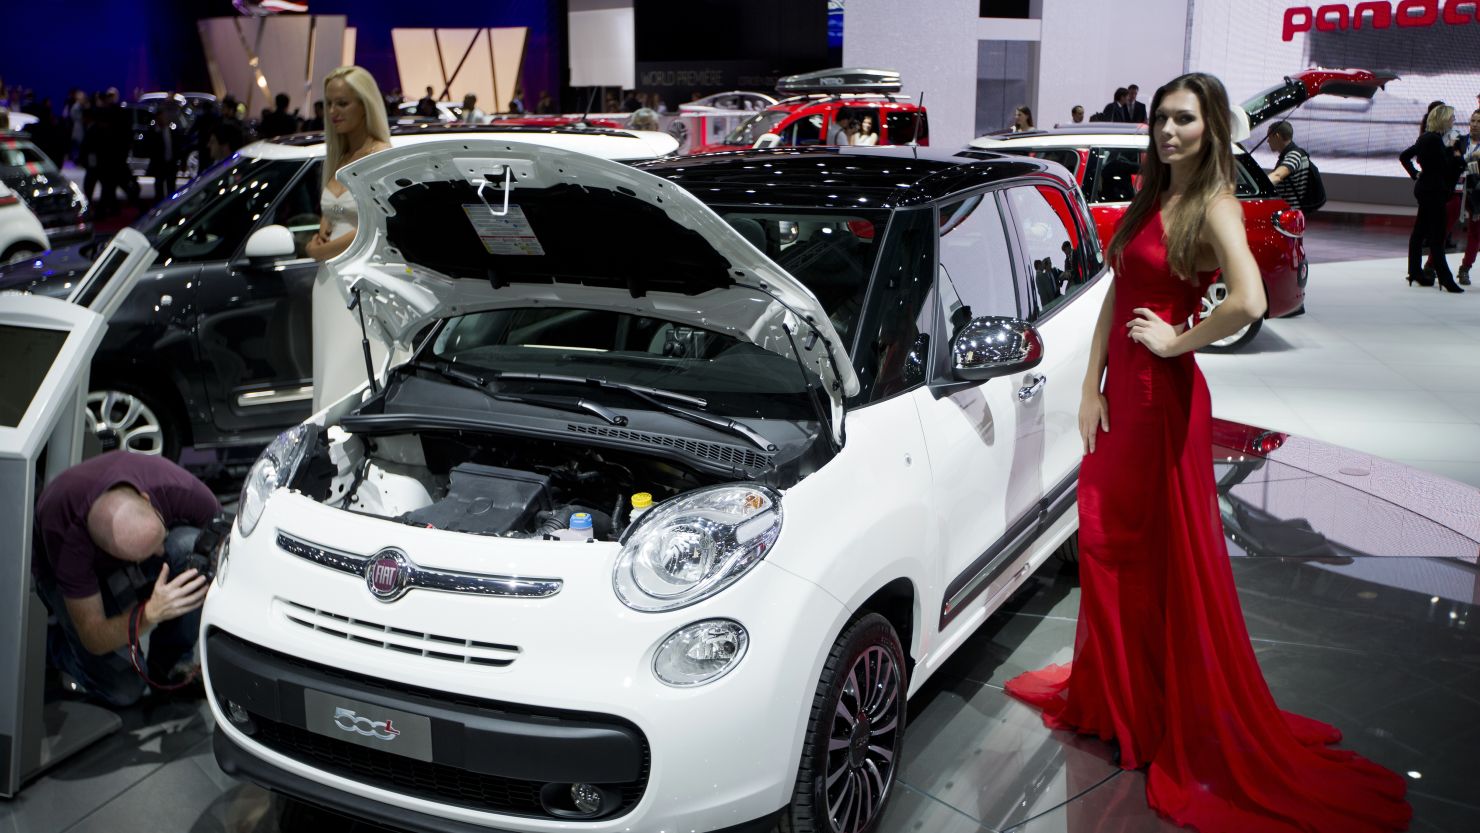 A Fiat 500 is displayed  at the 2012 the Paris Motor Show.